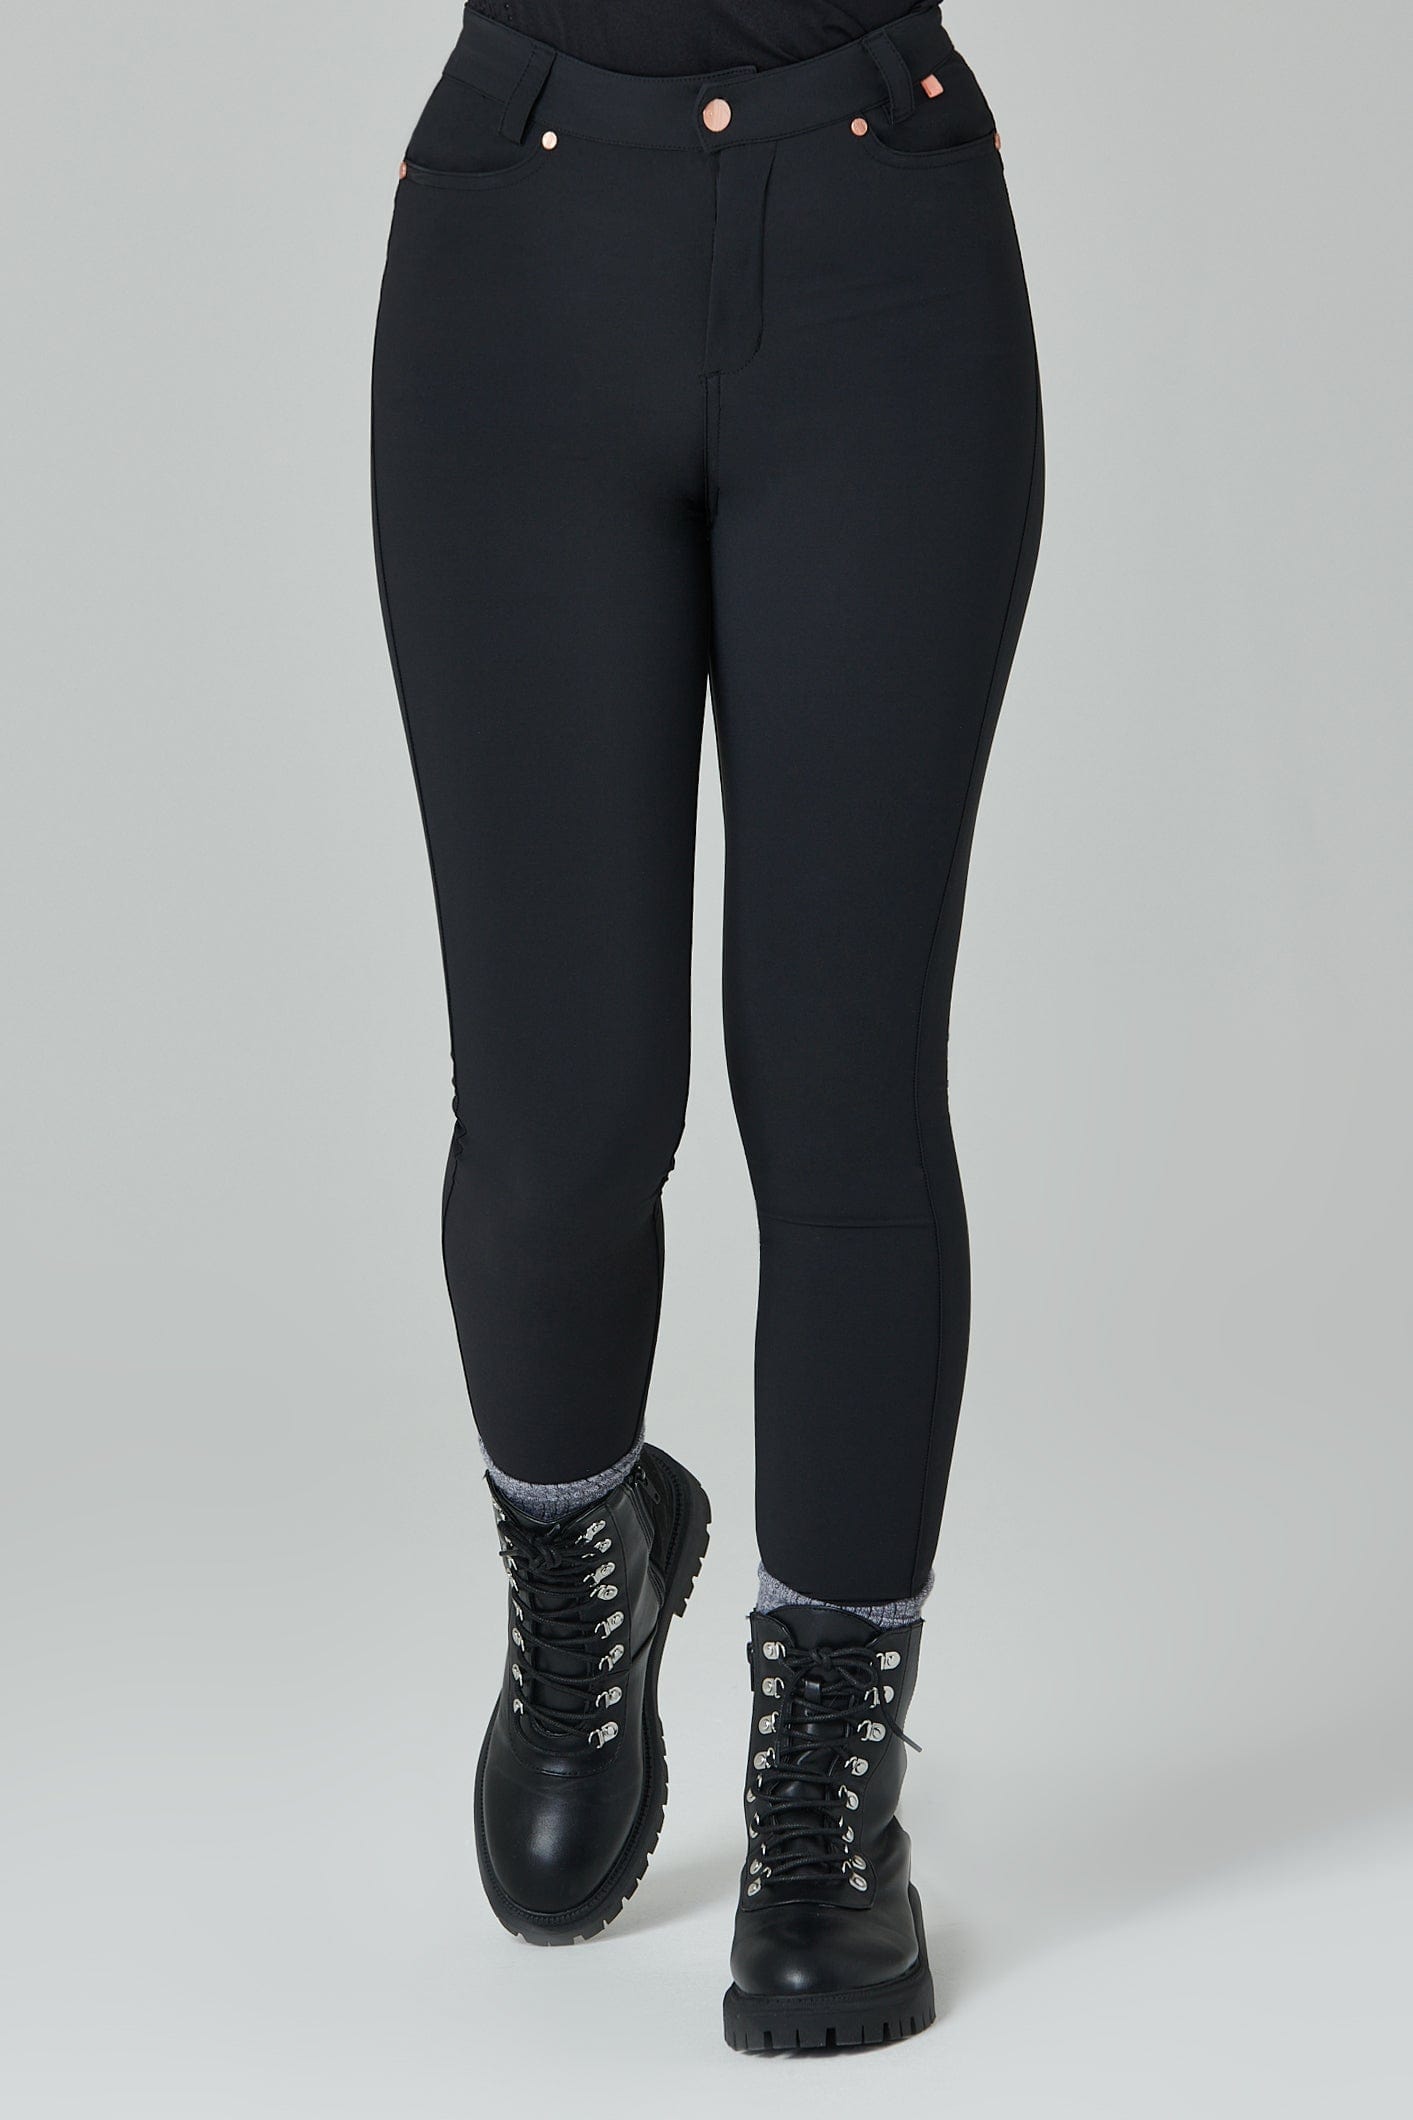 Max Stretch Skinny Outdoor Trousers - Black - 28r / Uk10 - Womens - Acai Outdoorwear